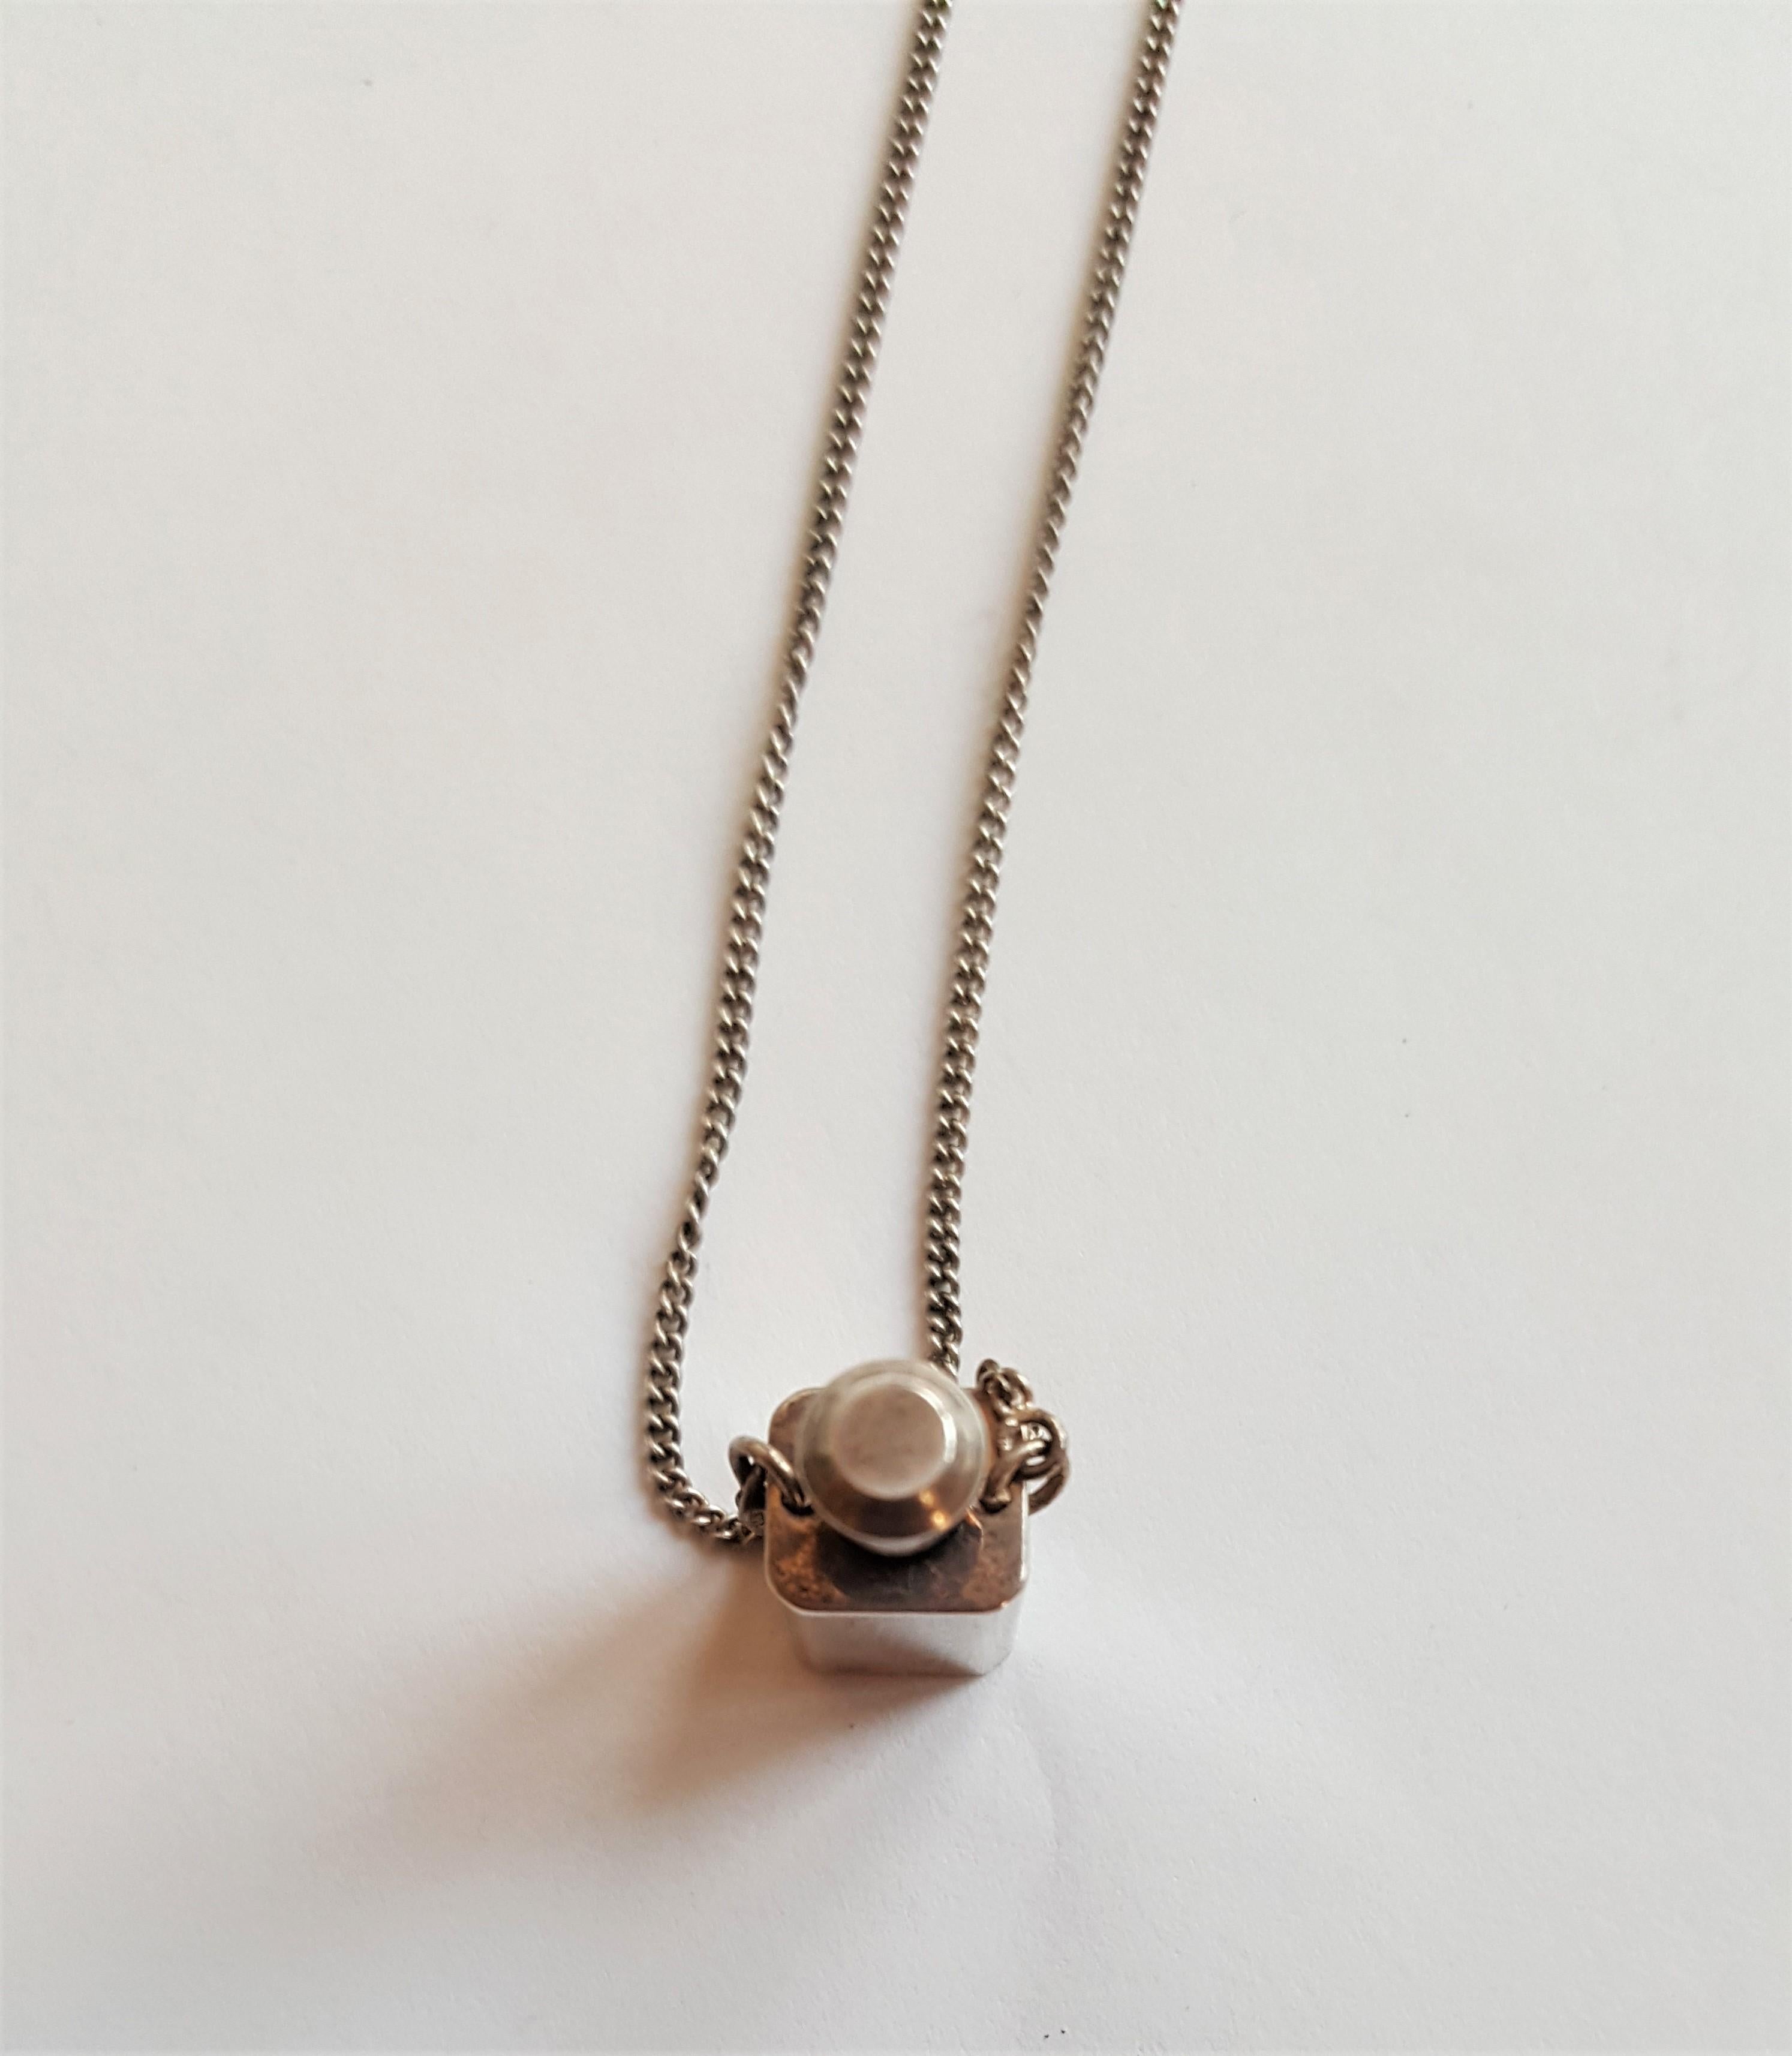 Unique 24mm x 9mm vintage silver perfume bottle pendant with a 24-inch silver box chain secured with a spring-ring clasp. This pendant and chain are in very good condition. Please let us know if you have any questions; we look forward to hearing